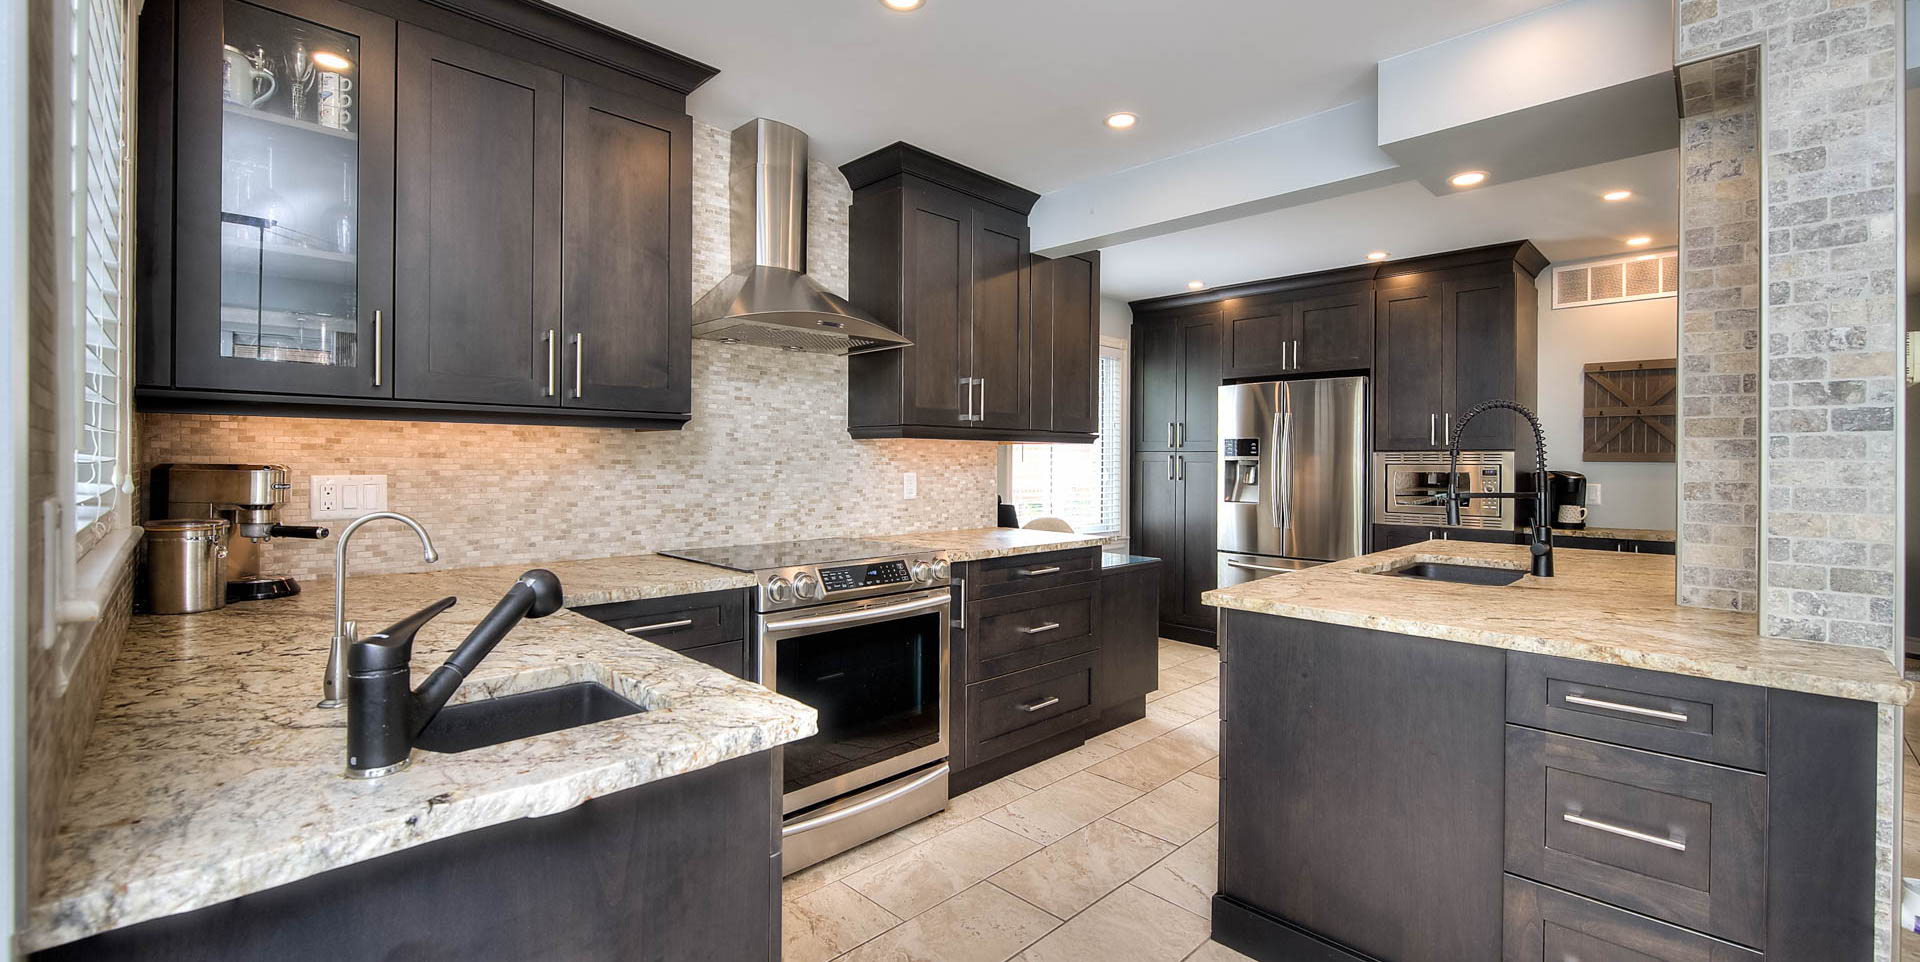 kitchen featuring ventilation hood, refrigerator, electric range oven, light tile floors, dark brown cabinets, and light stone countertops